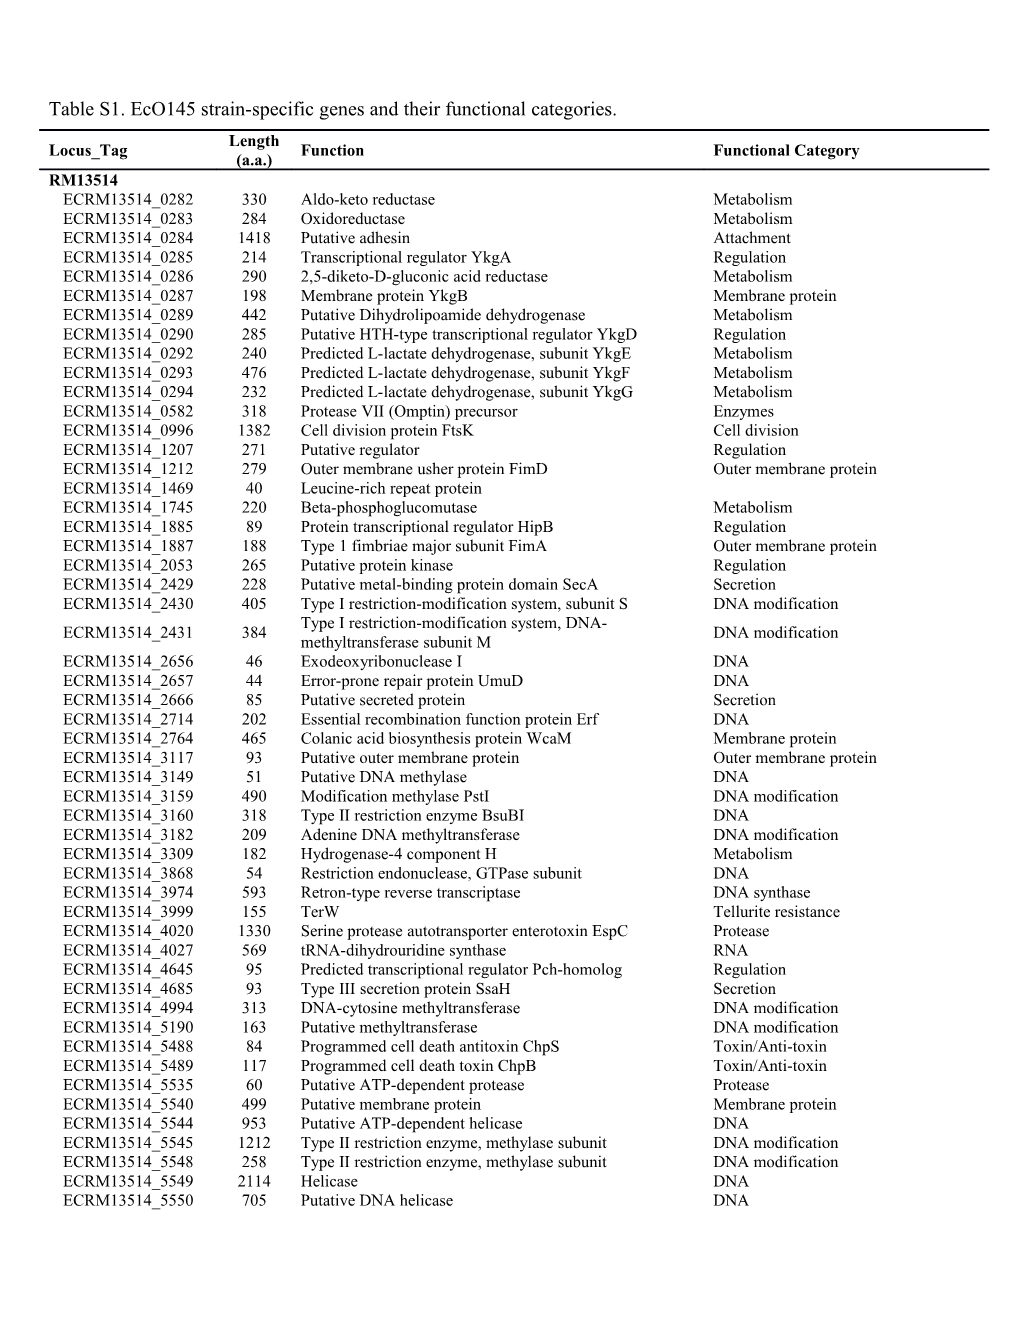 Table S1. Eco145 Strain-Specific Genes and Their Functional Categories